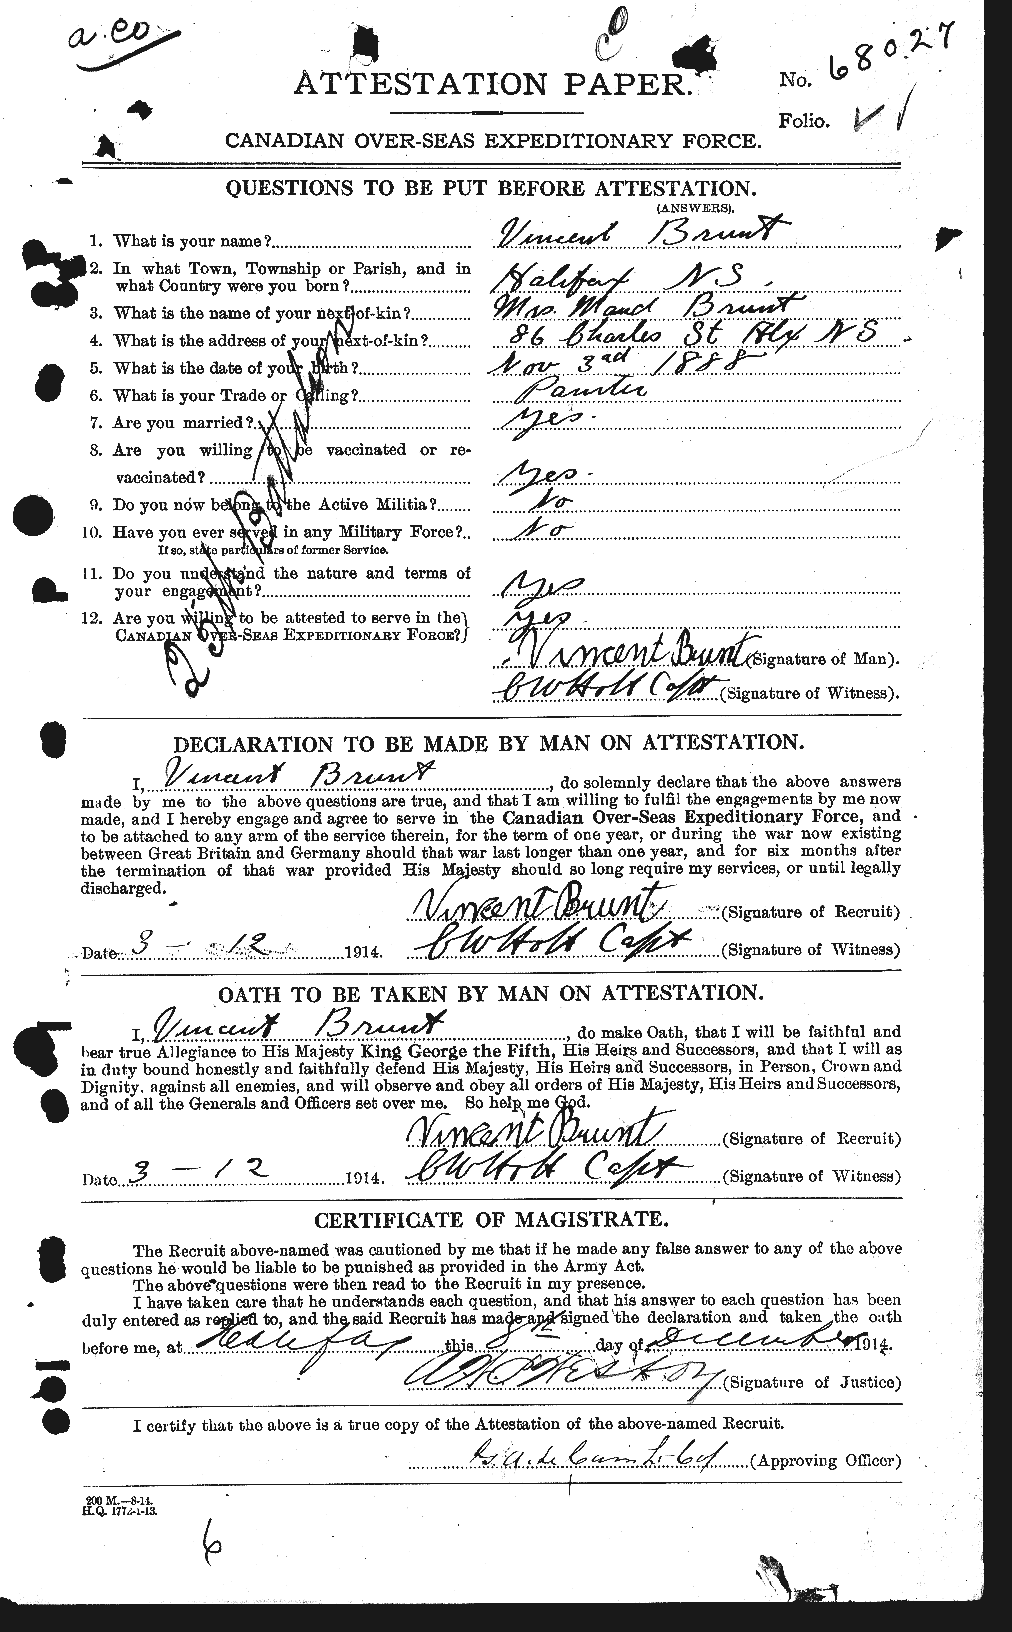 Personnel Records of the First World War - CEF 268613a